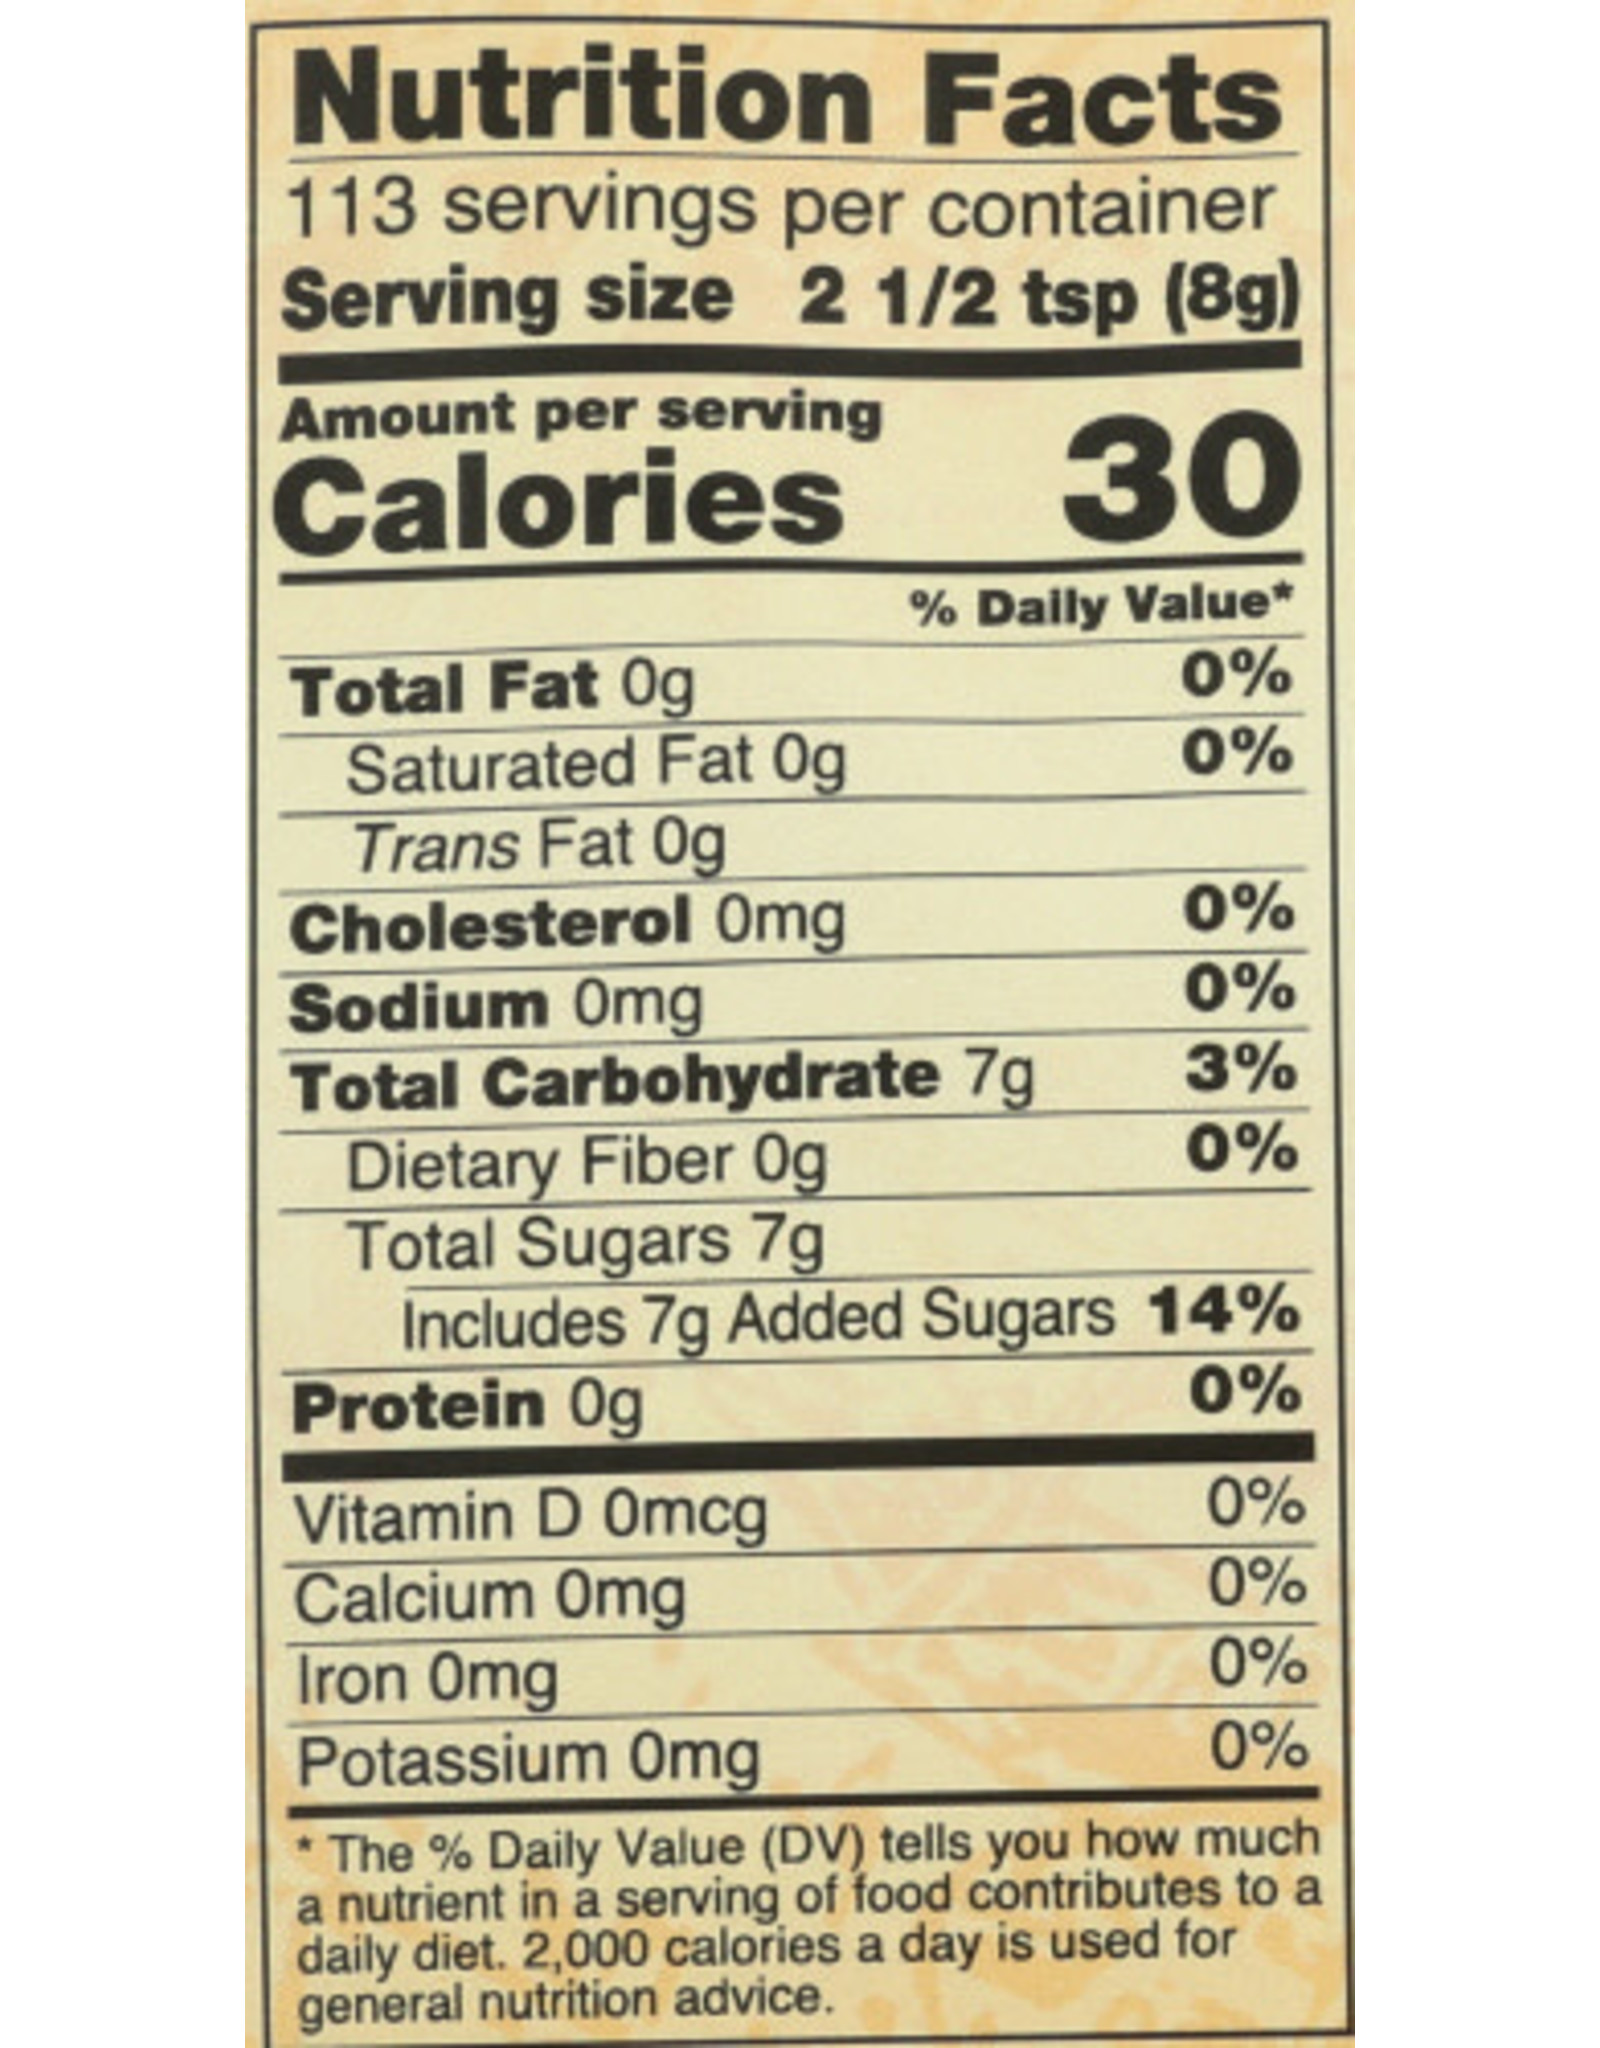 NOW REAL FOOD® NOW REAL FOODS DEXTROSE, 0.32 OZ.